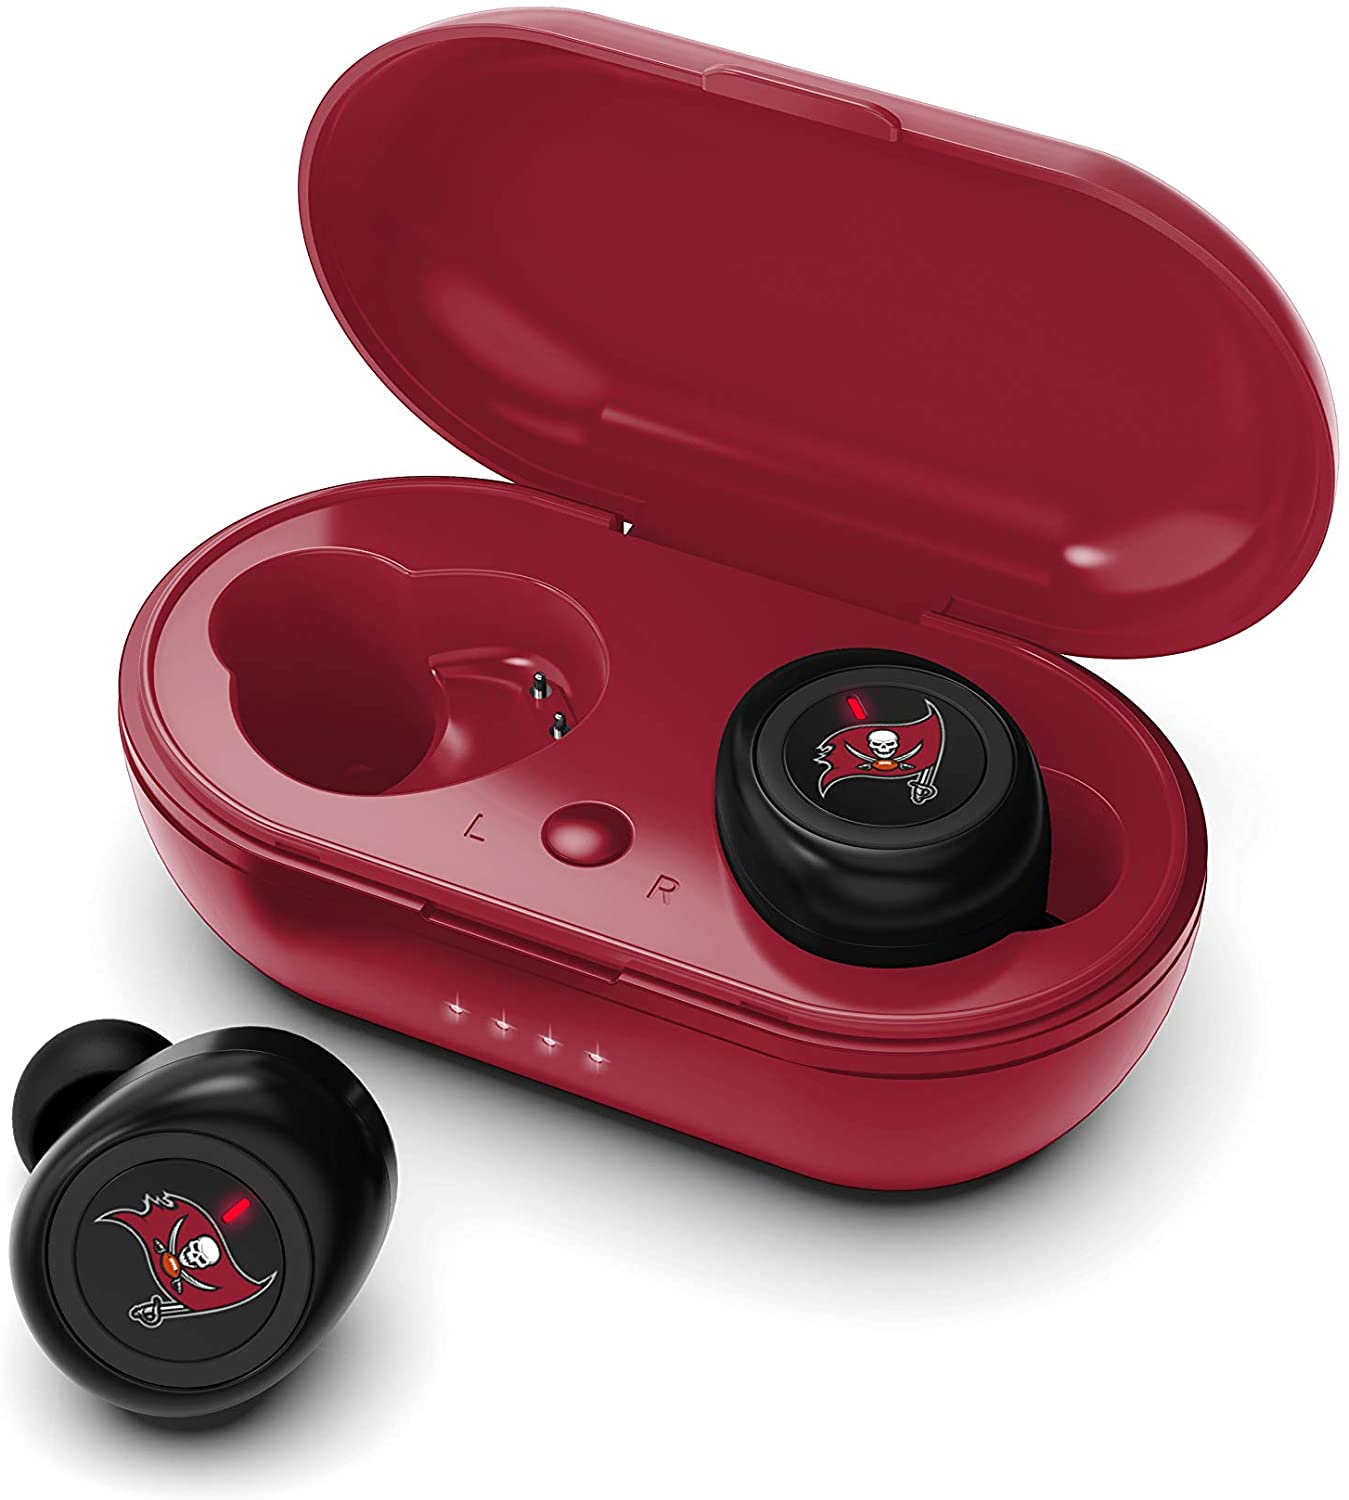 Tampa Bay Buccaneers True Wireless Bluetooth Earbuds w/Charging Case by Prime Brands